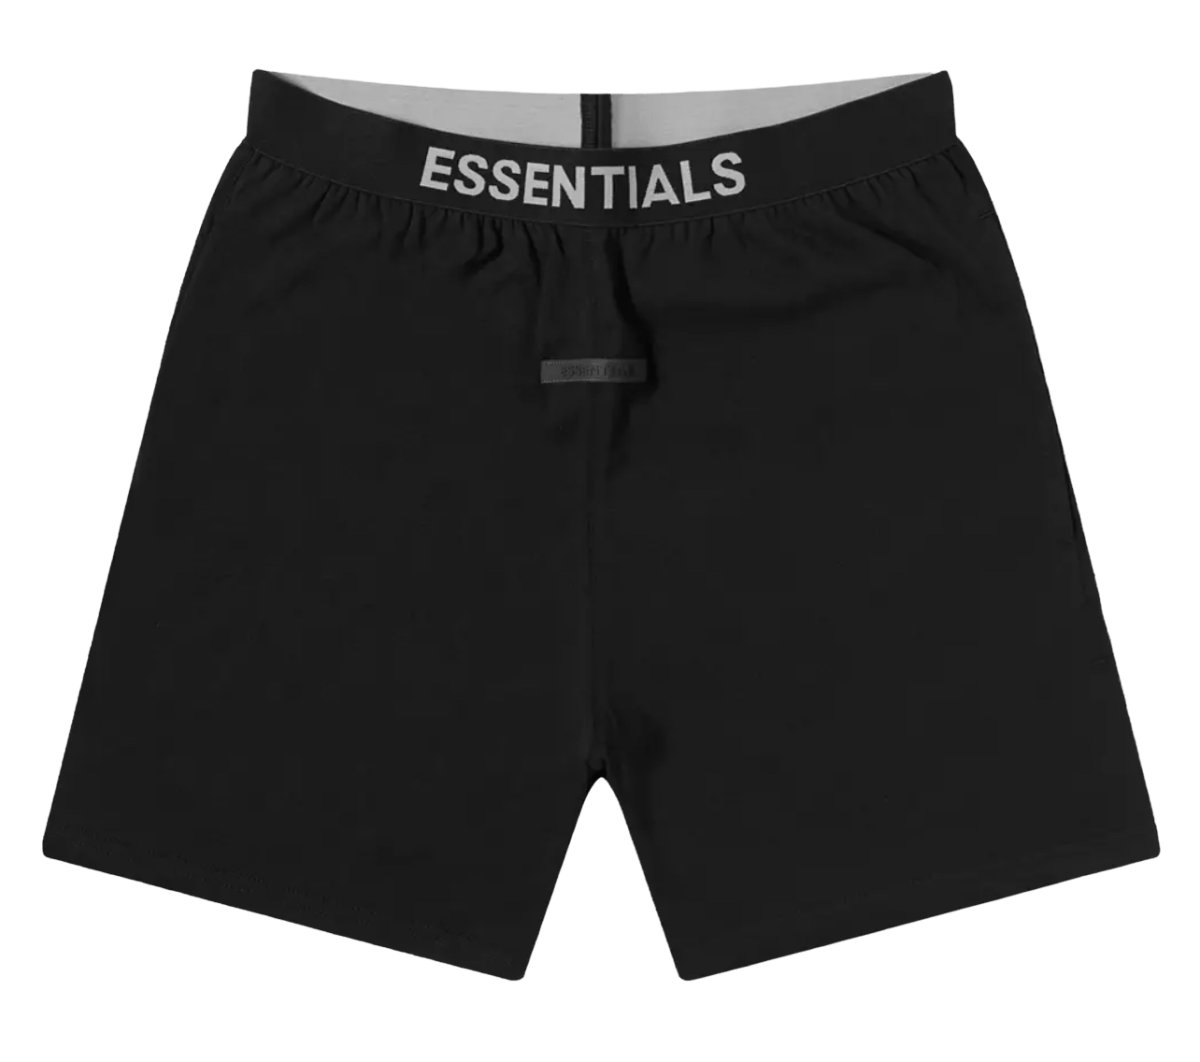 Essentials Fear of God Lounge Shorts Black - Bottoms - Essentials - Jawns on Fire